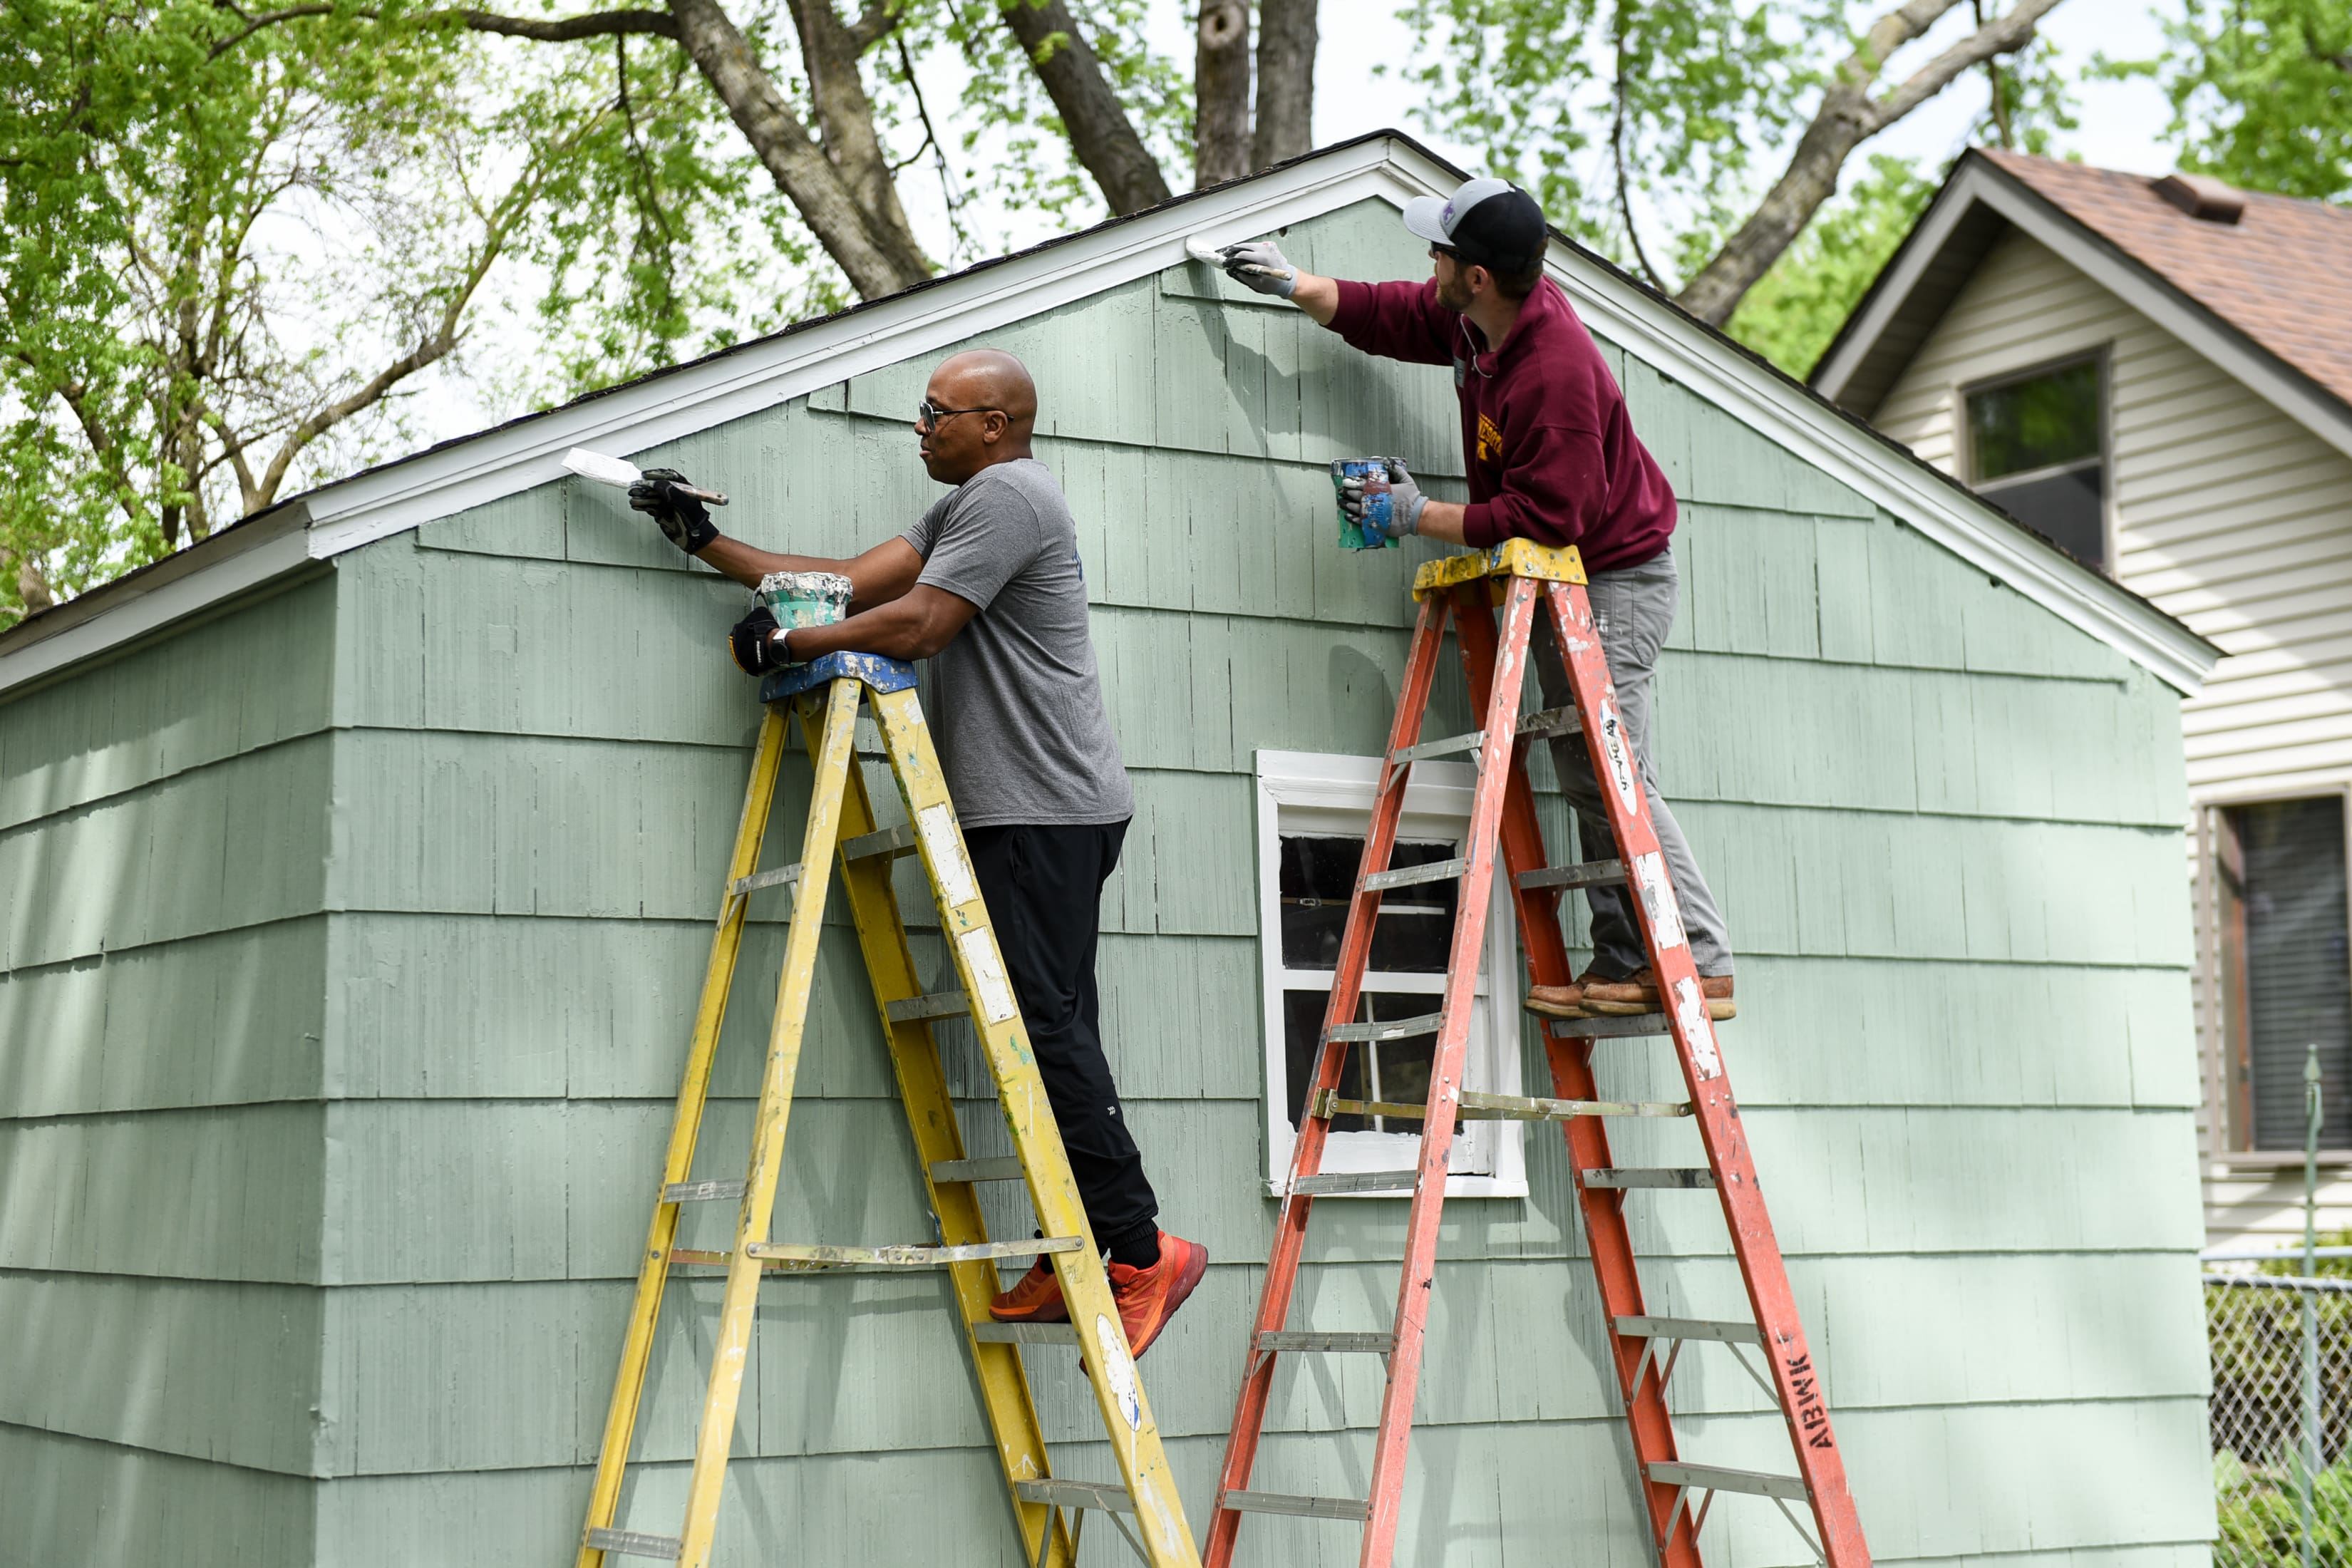 Two men on ladders paint the exterior of a home.